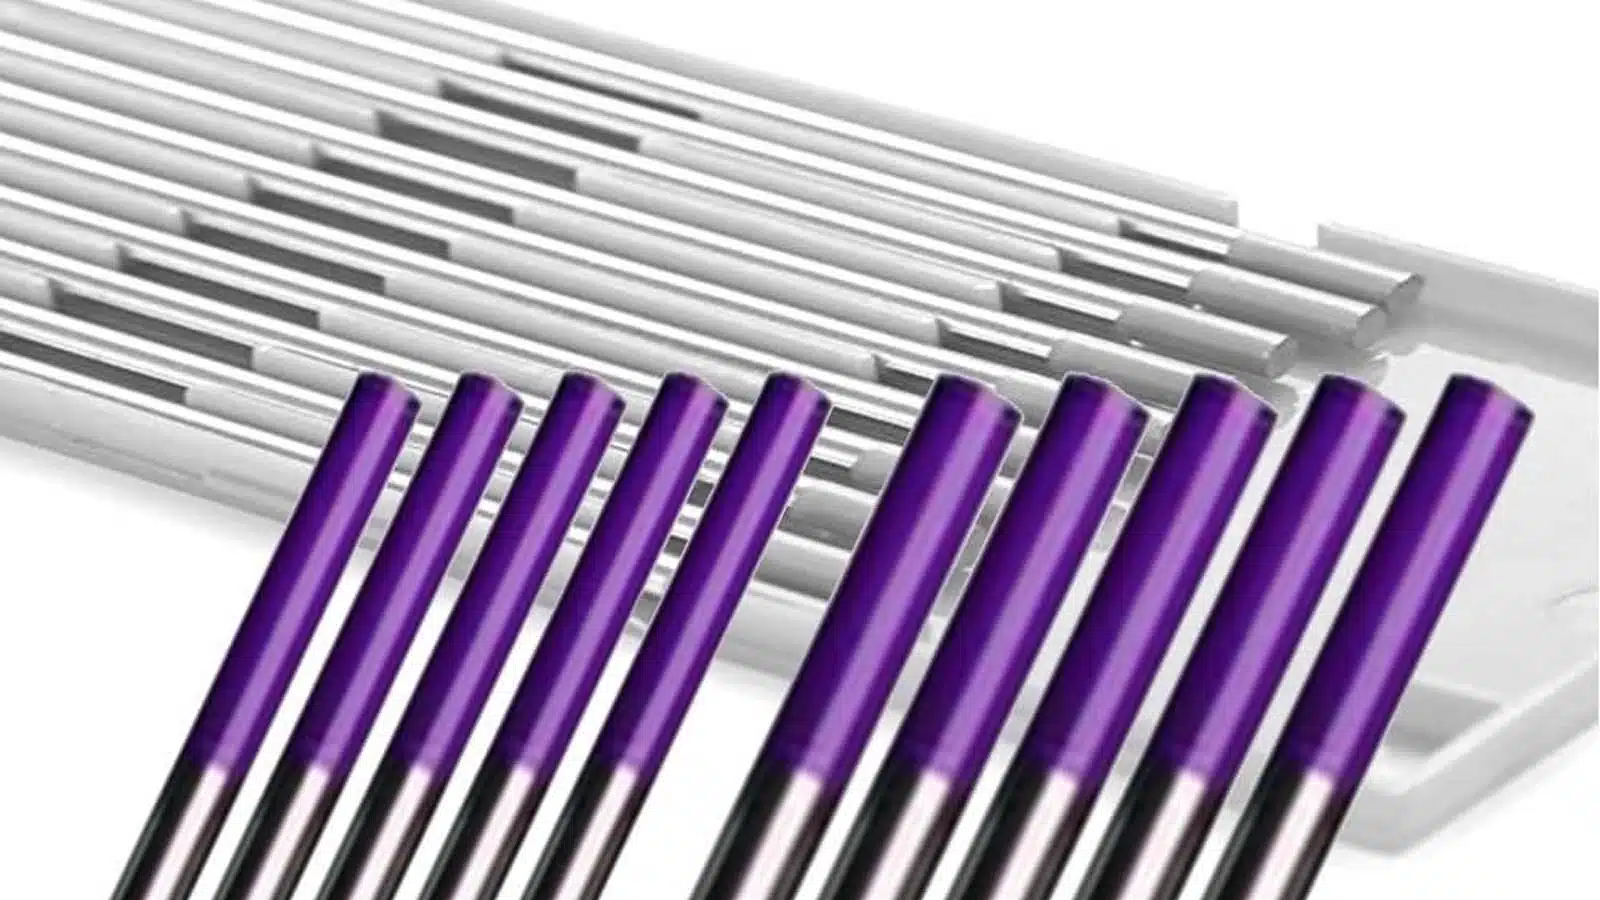 WHAT IS PURPLE TUNGSTEN USED FOR?